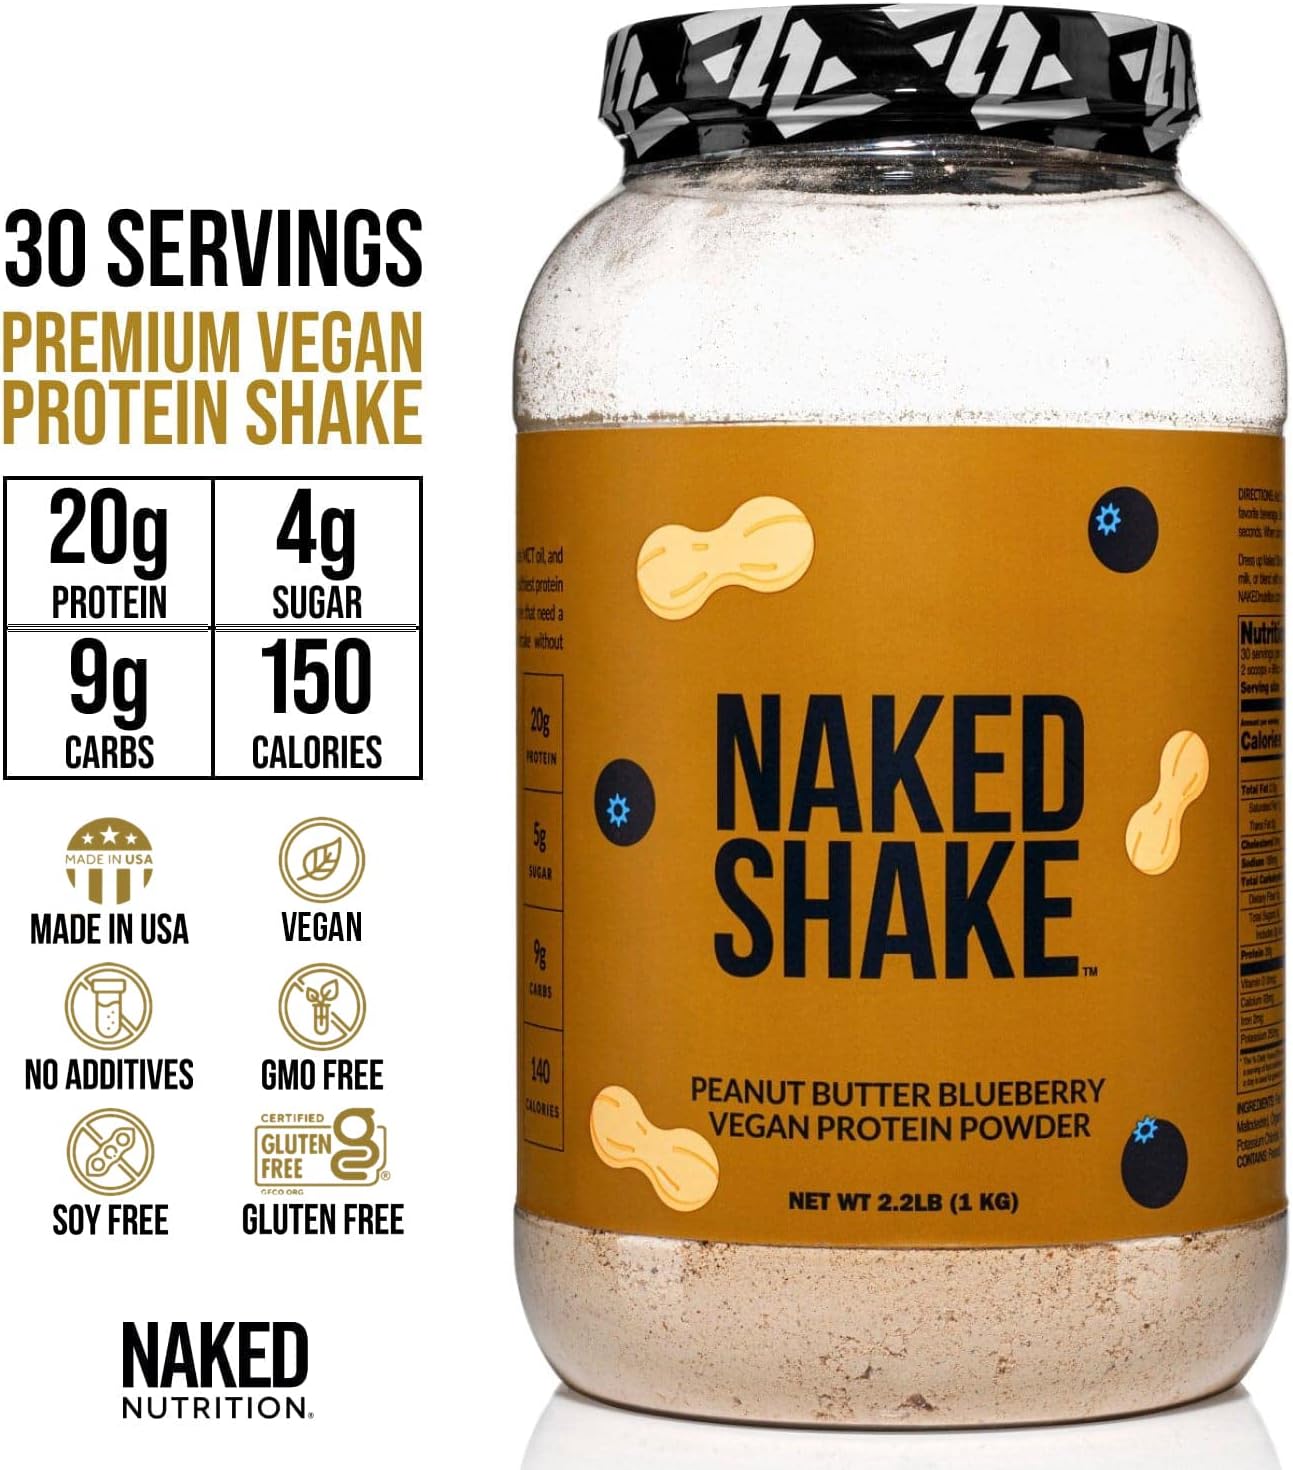 NAKED nutrition Naked Shake - Peanut Butter Blueberry Protein Powder, Plant Based Protein With Mct Oil, Gluten-Free, Soy-Free, No Gmos Or Artificial Sweeteners - 30 Servings : Health & Household